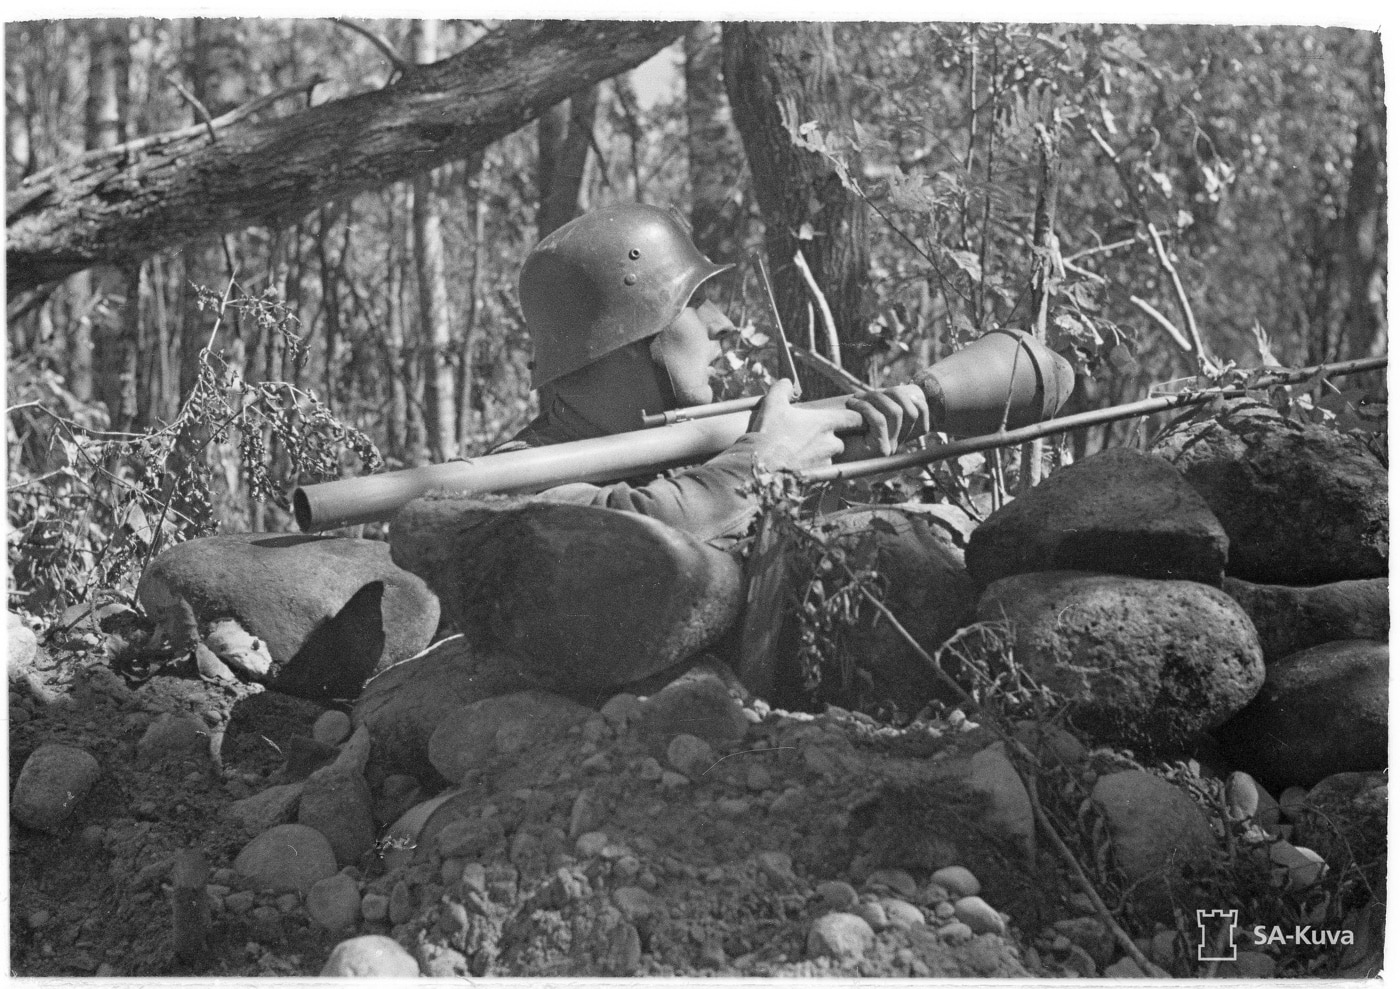 infantry soldier with panzerfaust